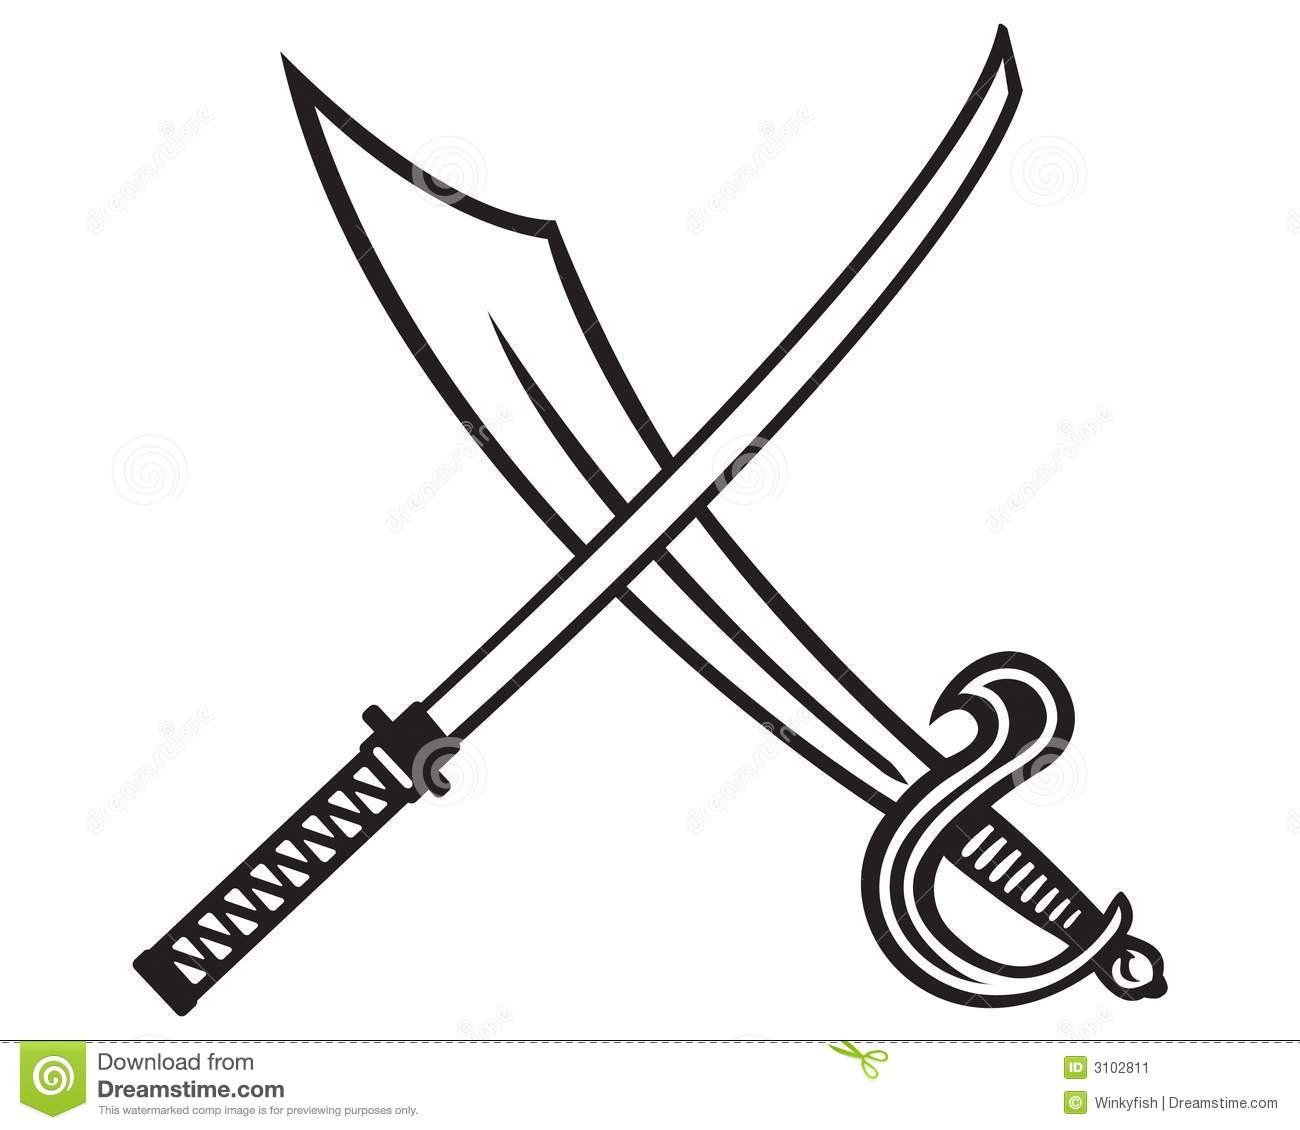 Black And White Drawing Of A Ninja Sword And A Pirate Sword Crossed